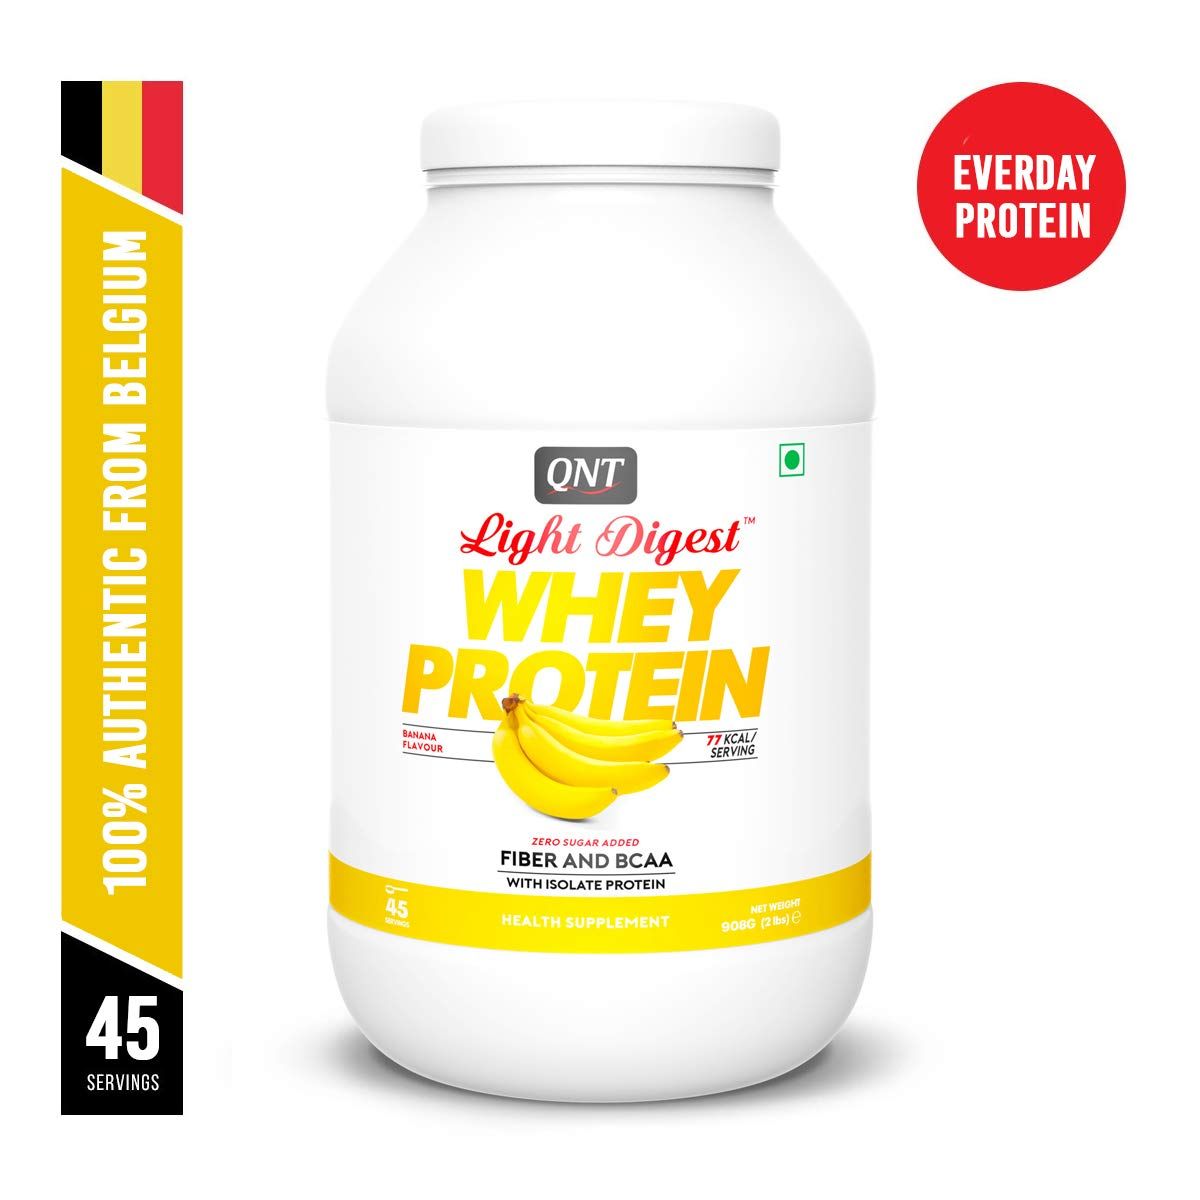 QNT Light Digest Whey Protein Banana Flavour Powder, 908 gm, Pack of 1 